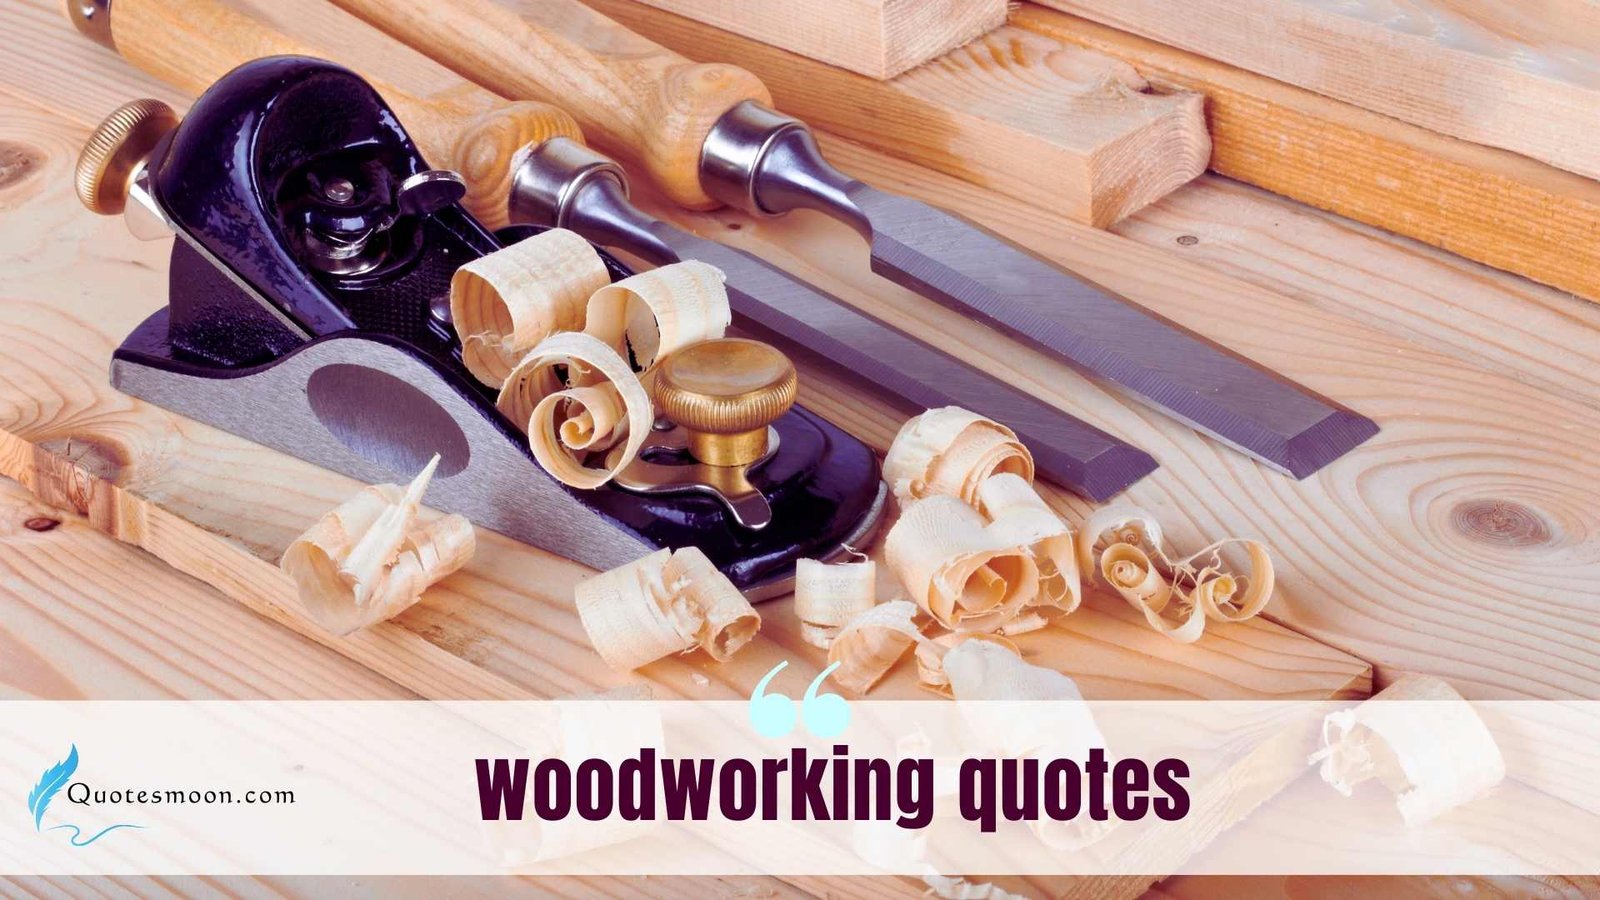 woodworking quotes images